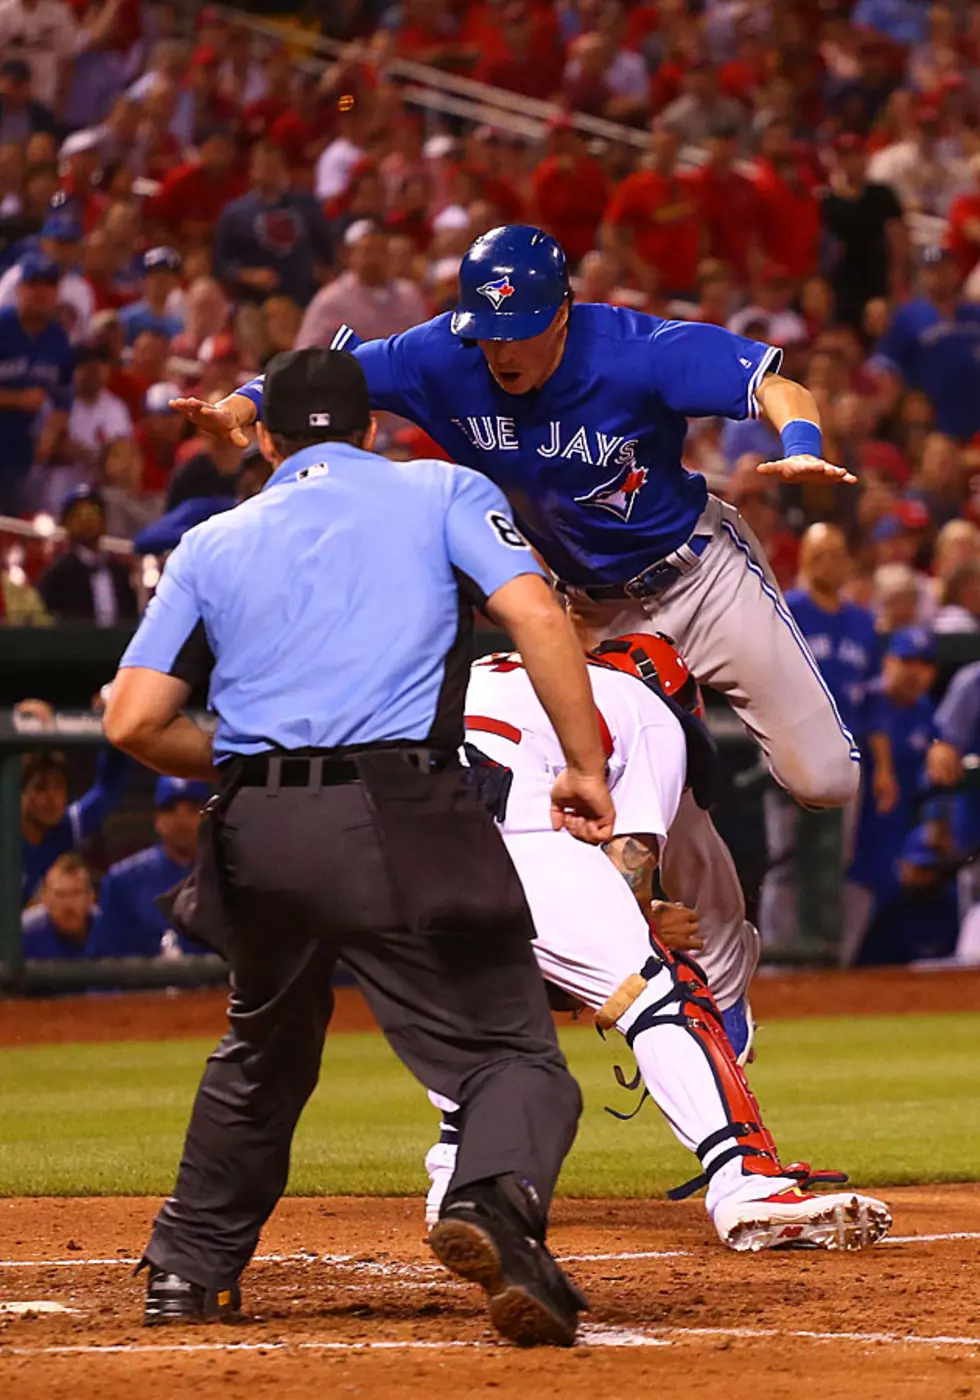 Chris Coghlan’s Acrobatic Dive Over Catcher Into Home Is the Slide of the Year